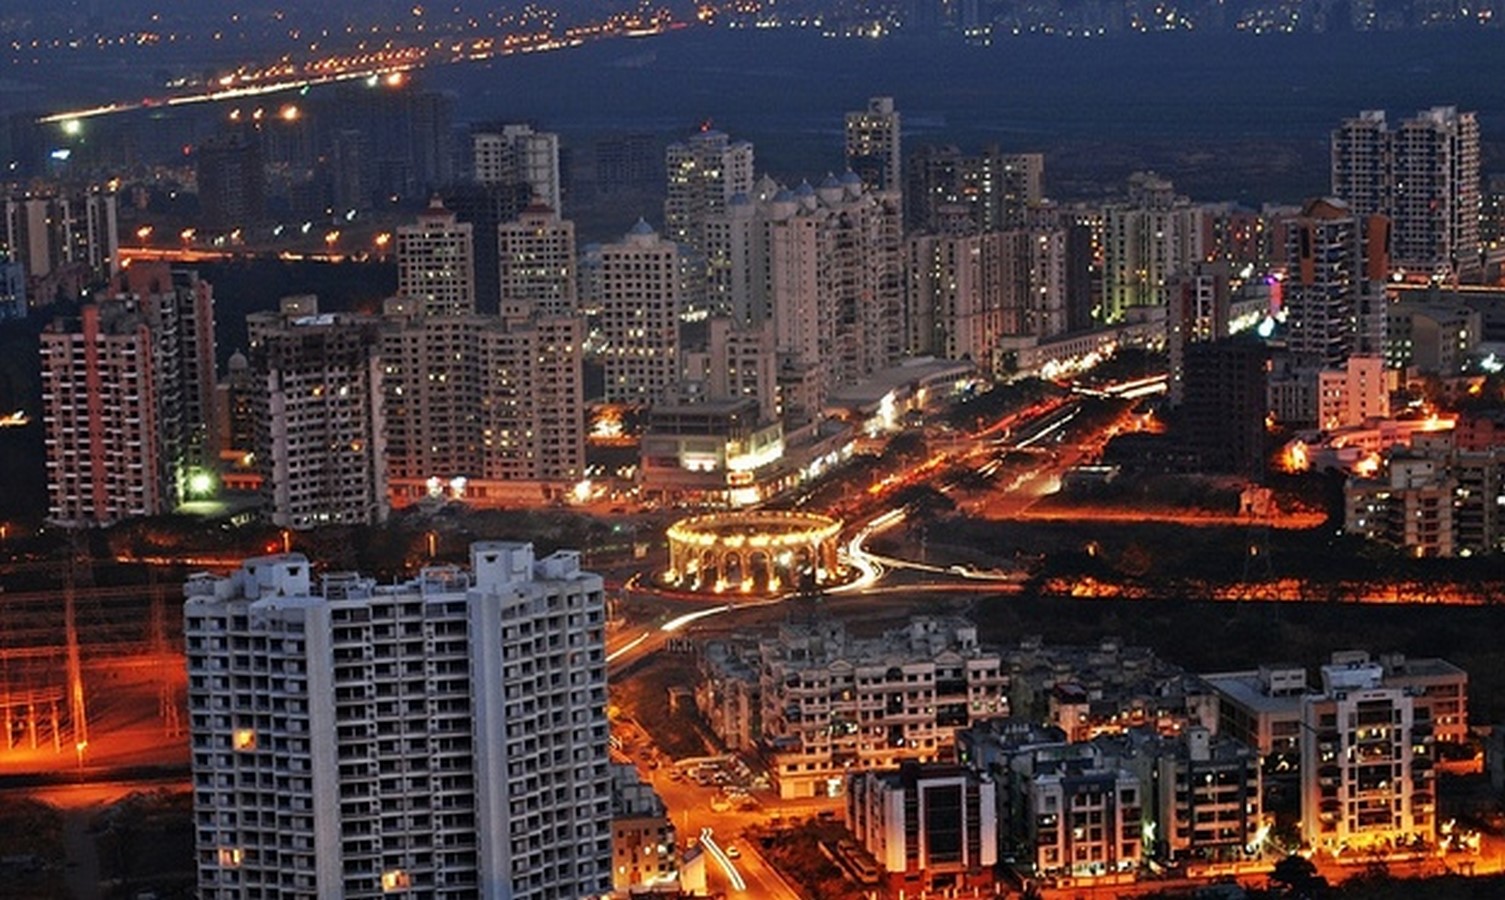 https://www.re-thinkingthefuture.com/city-and-architecture/5070-navi-mumbai-largest-planned-city-in-the-world/attachment/image-sources-image-1_navi-mumbai_getty-image/